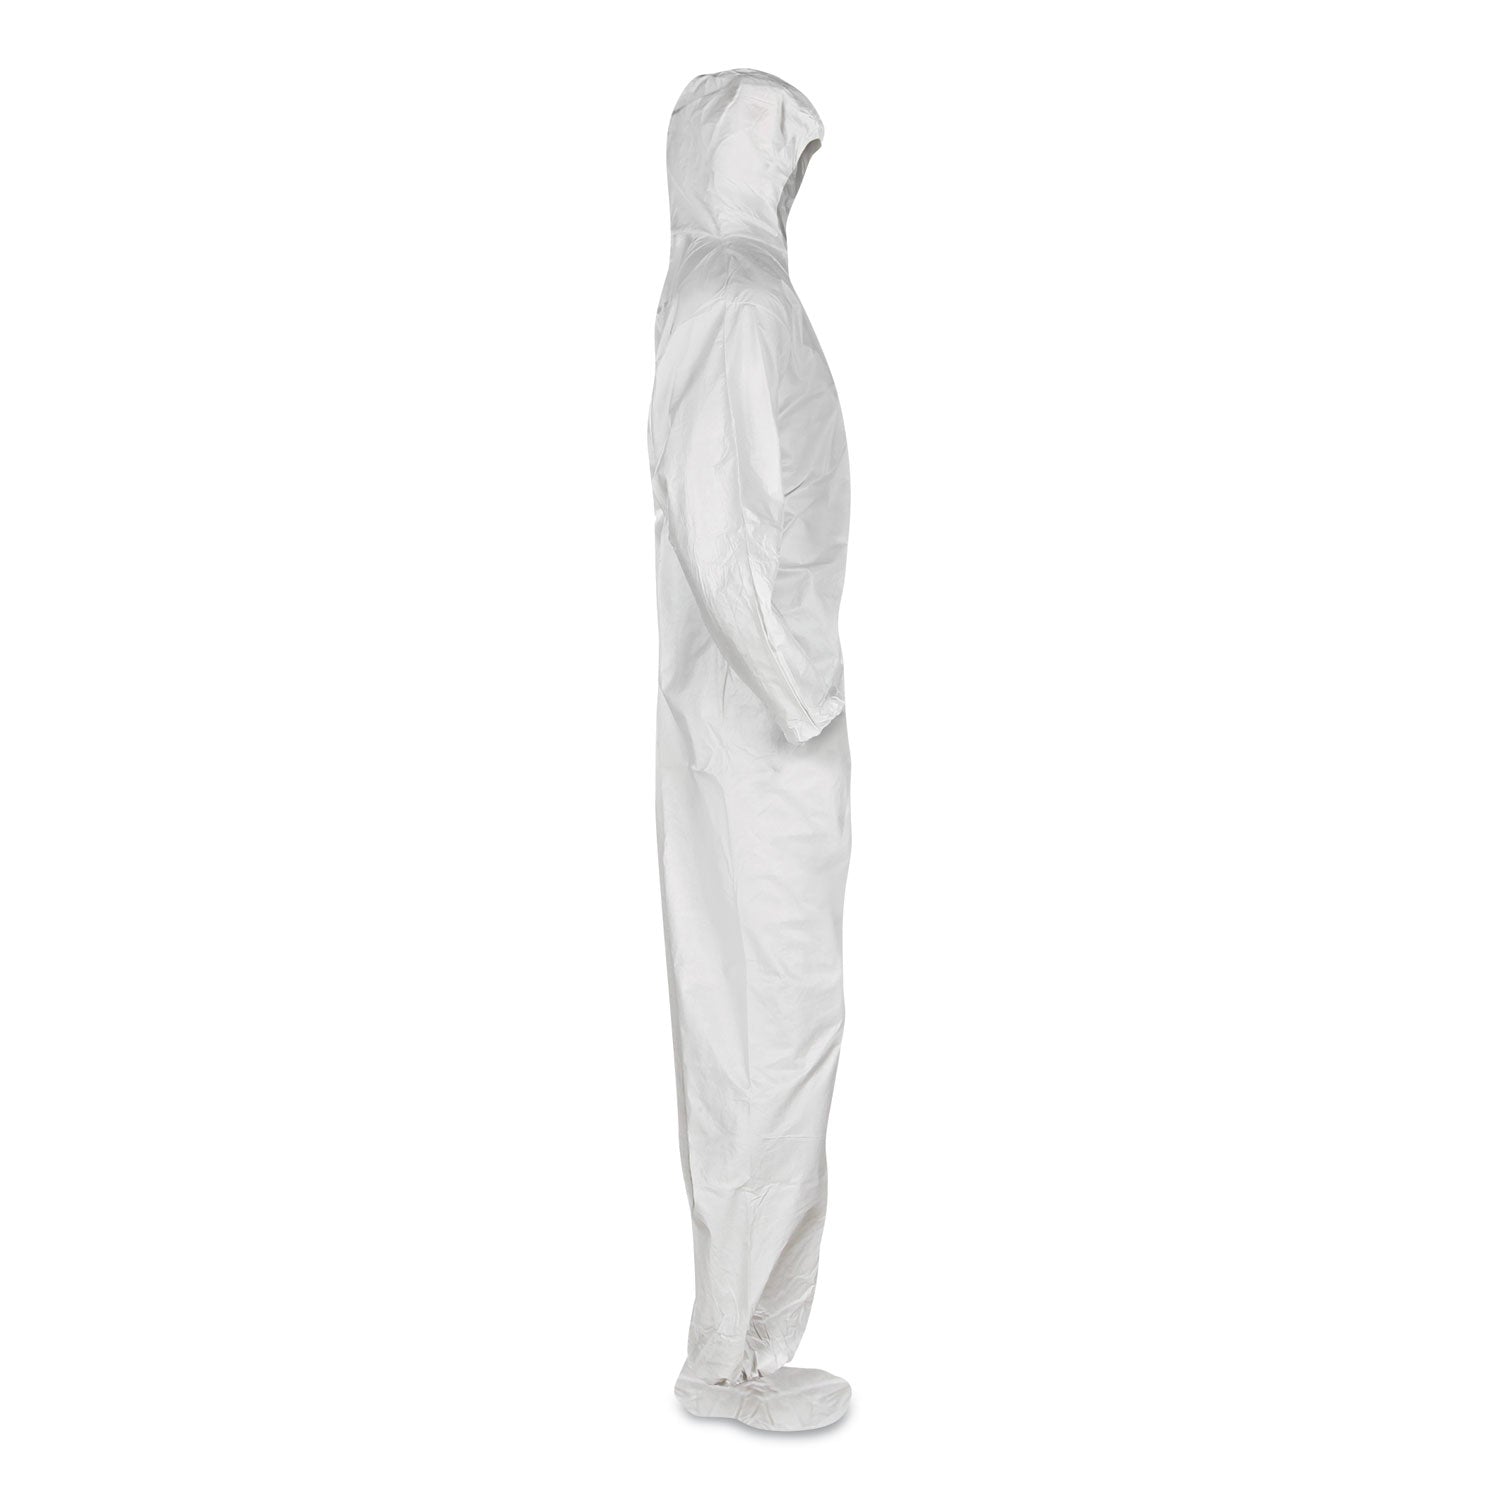 a20-breathable-particle-protection-coveralls-elastic-back-hood-and-boots-4x-large-white-20-carton_kcc49127 - 1